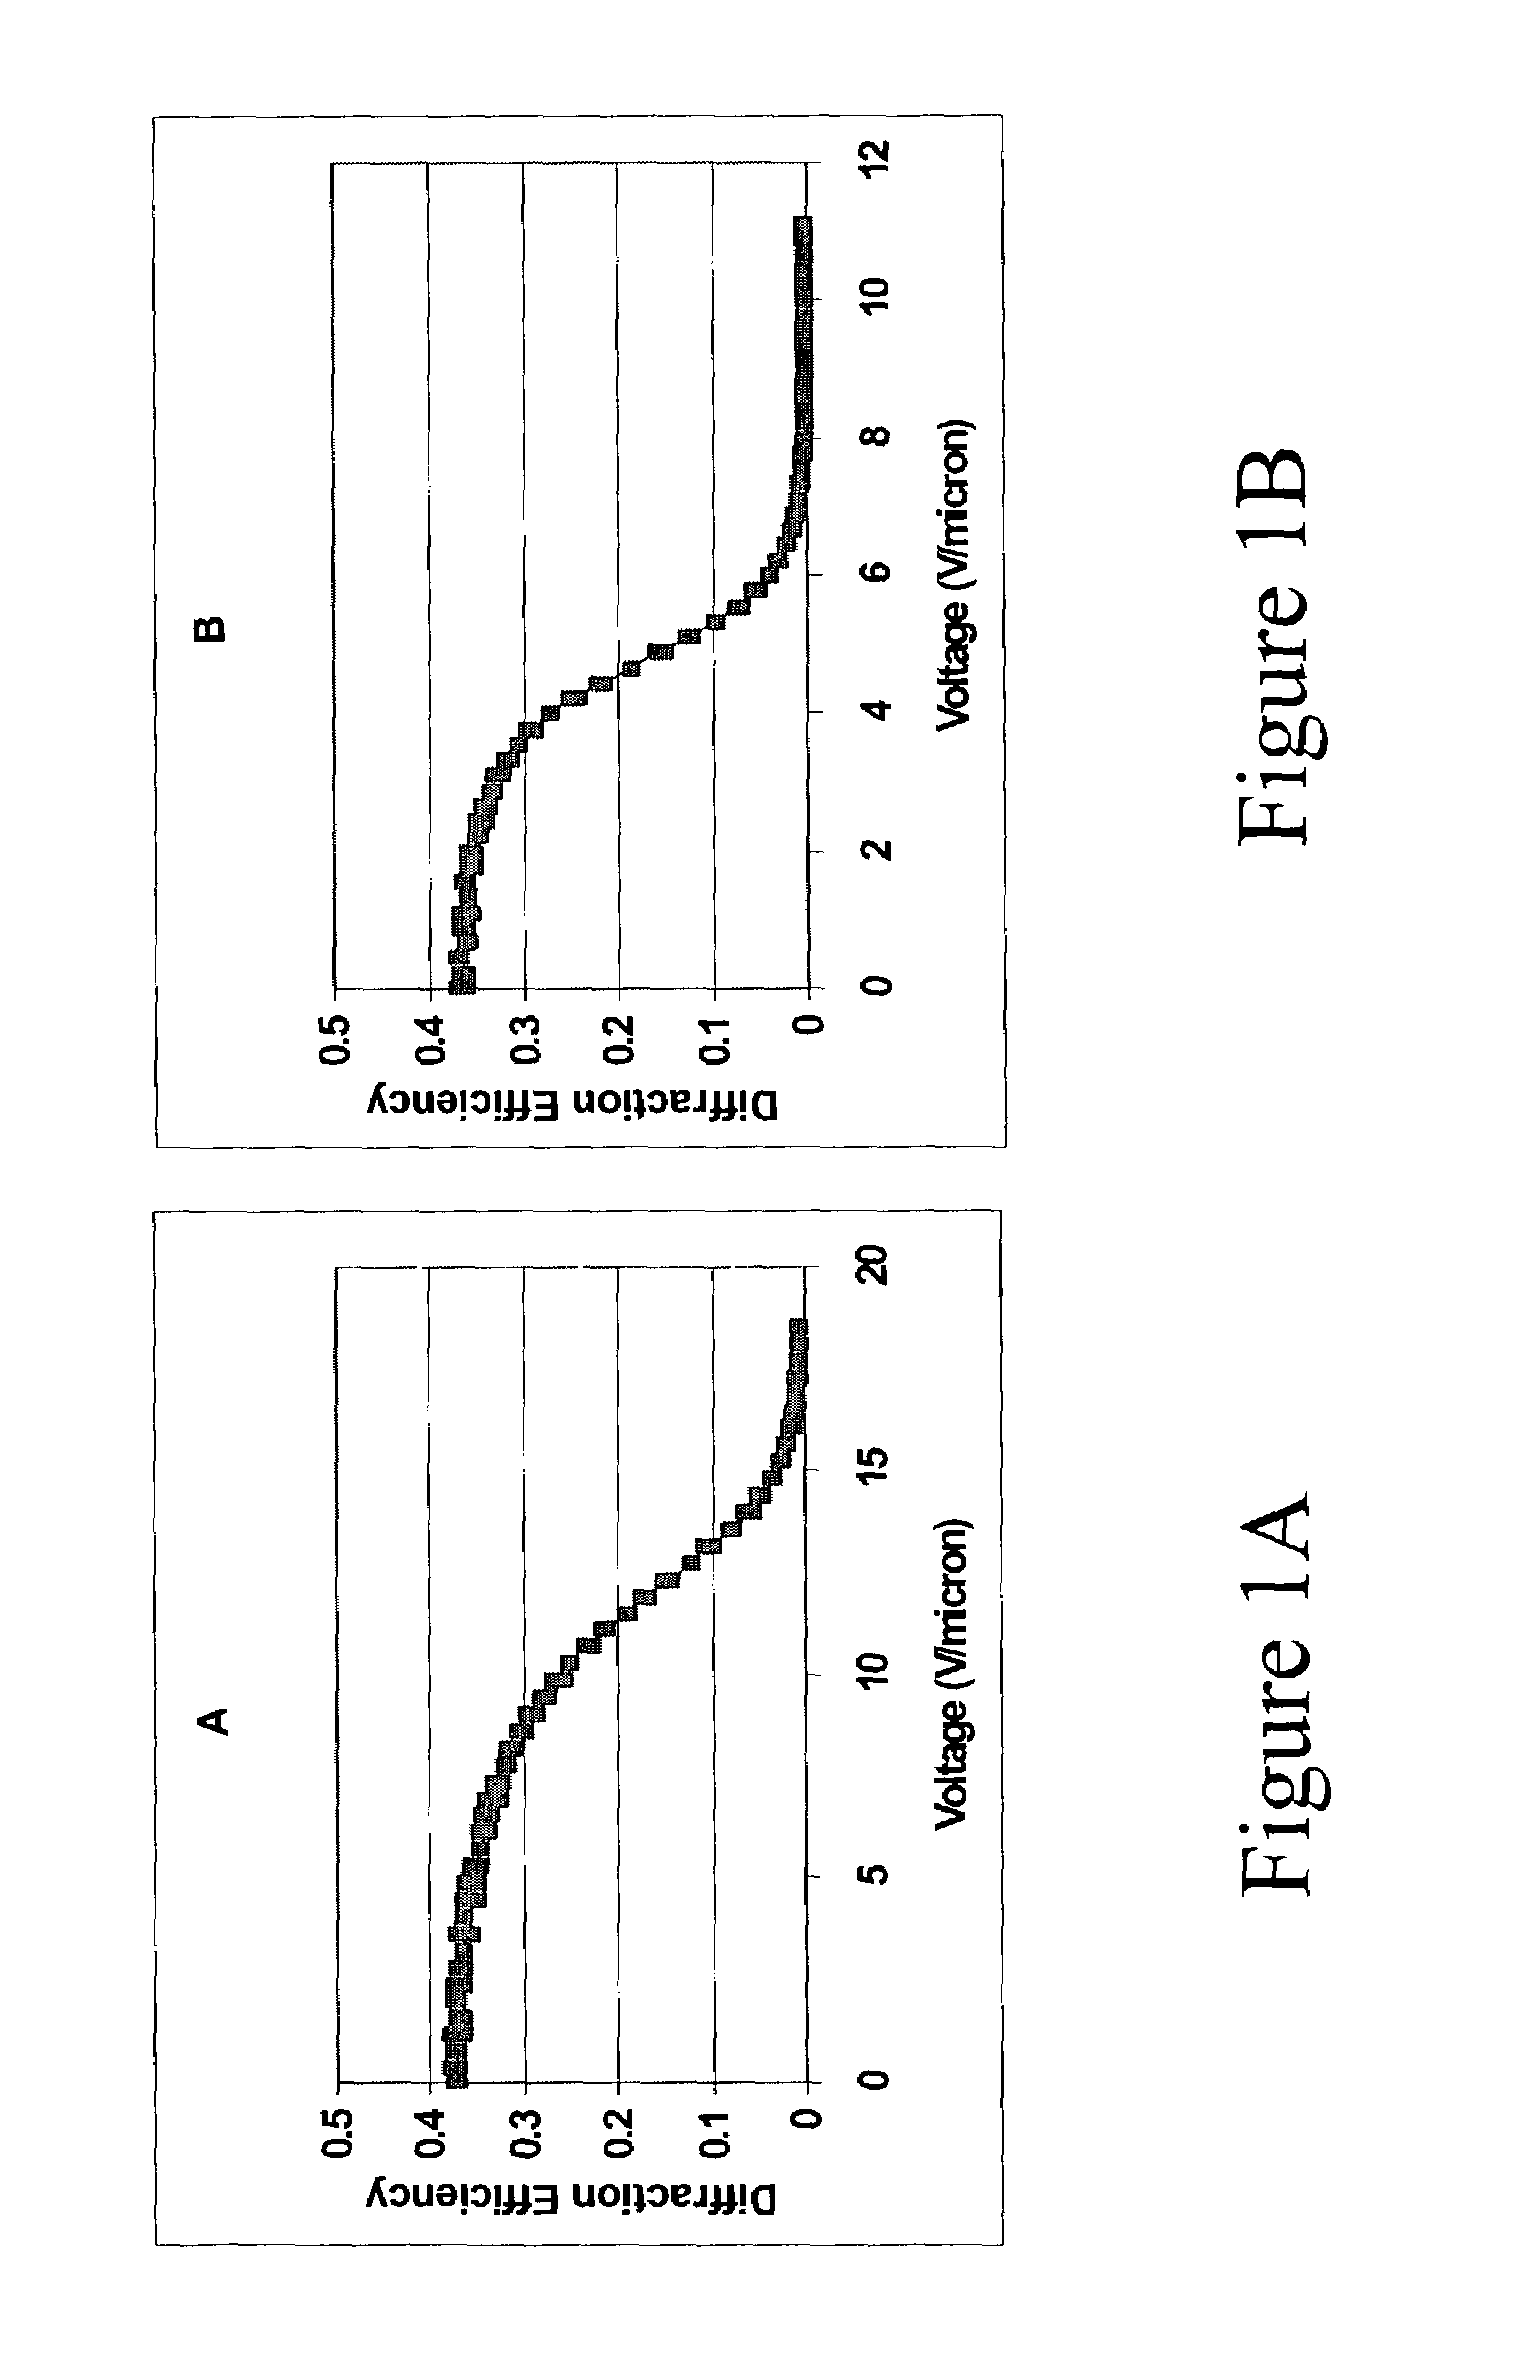 Tailoring material composition for optimization of application-specific switchable holograms